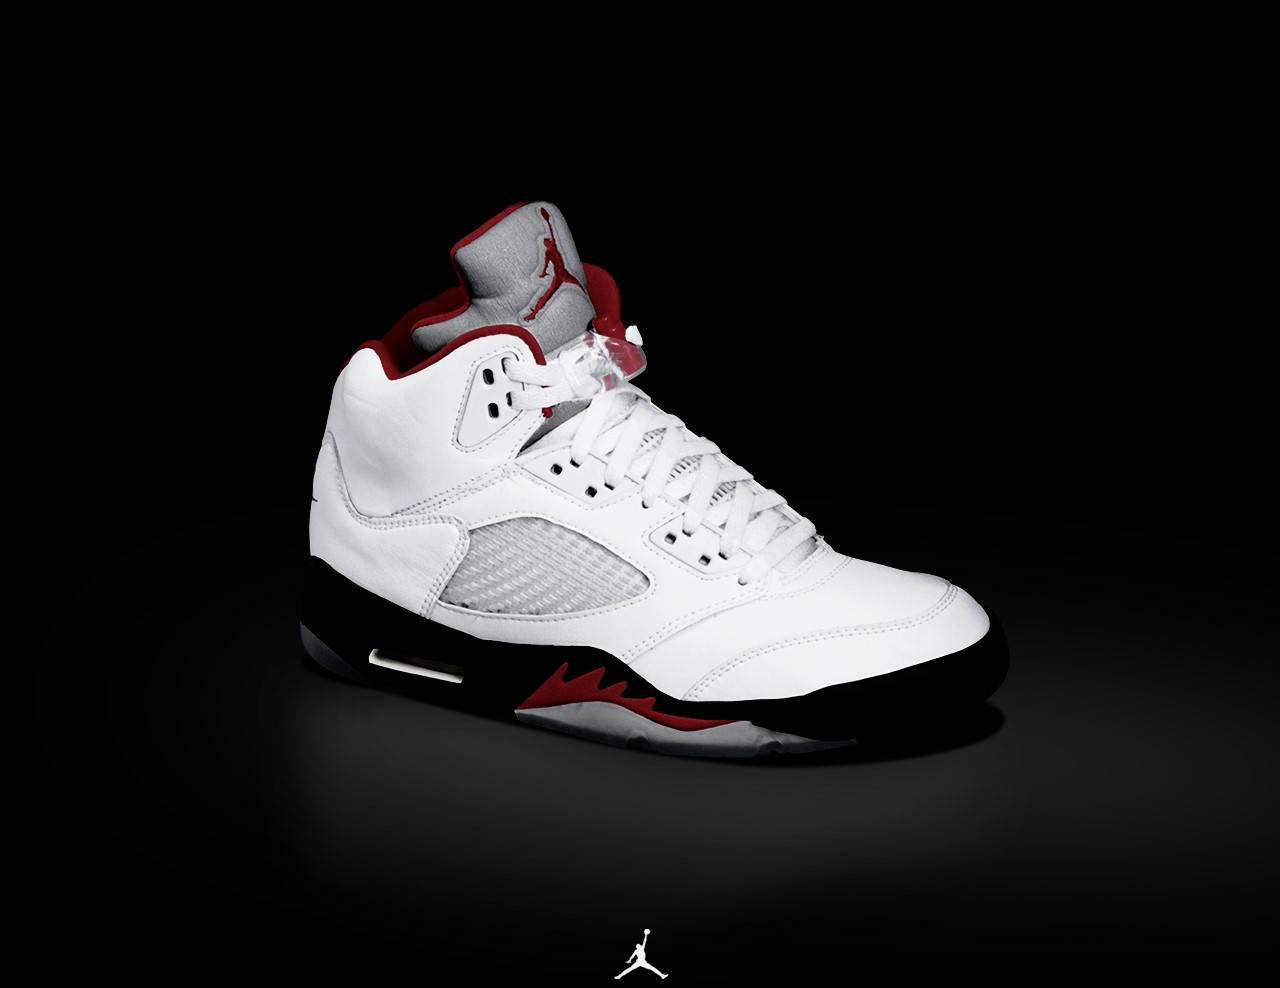 Image  A classic pair of Jordan Shoes as first released in 1985 Wallpaper